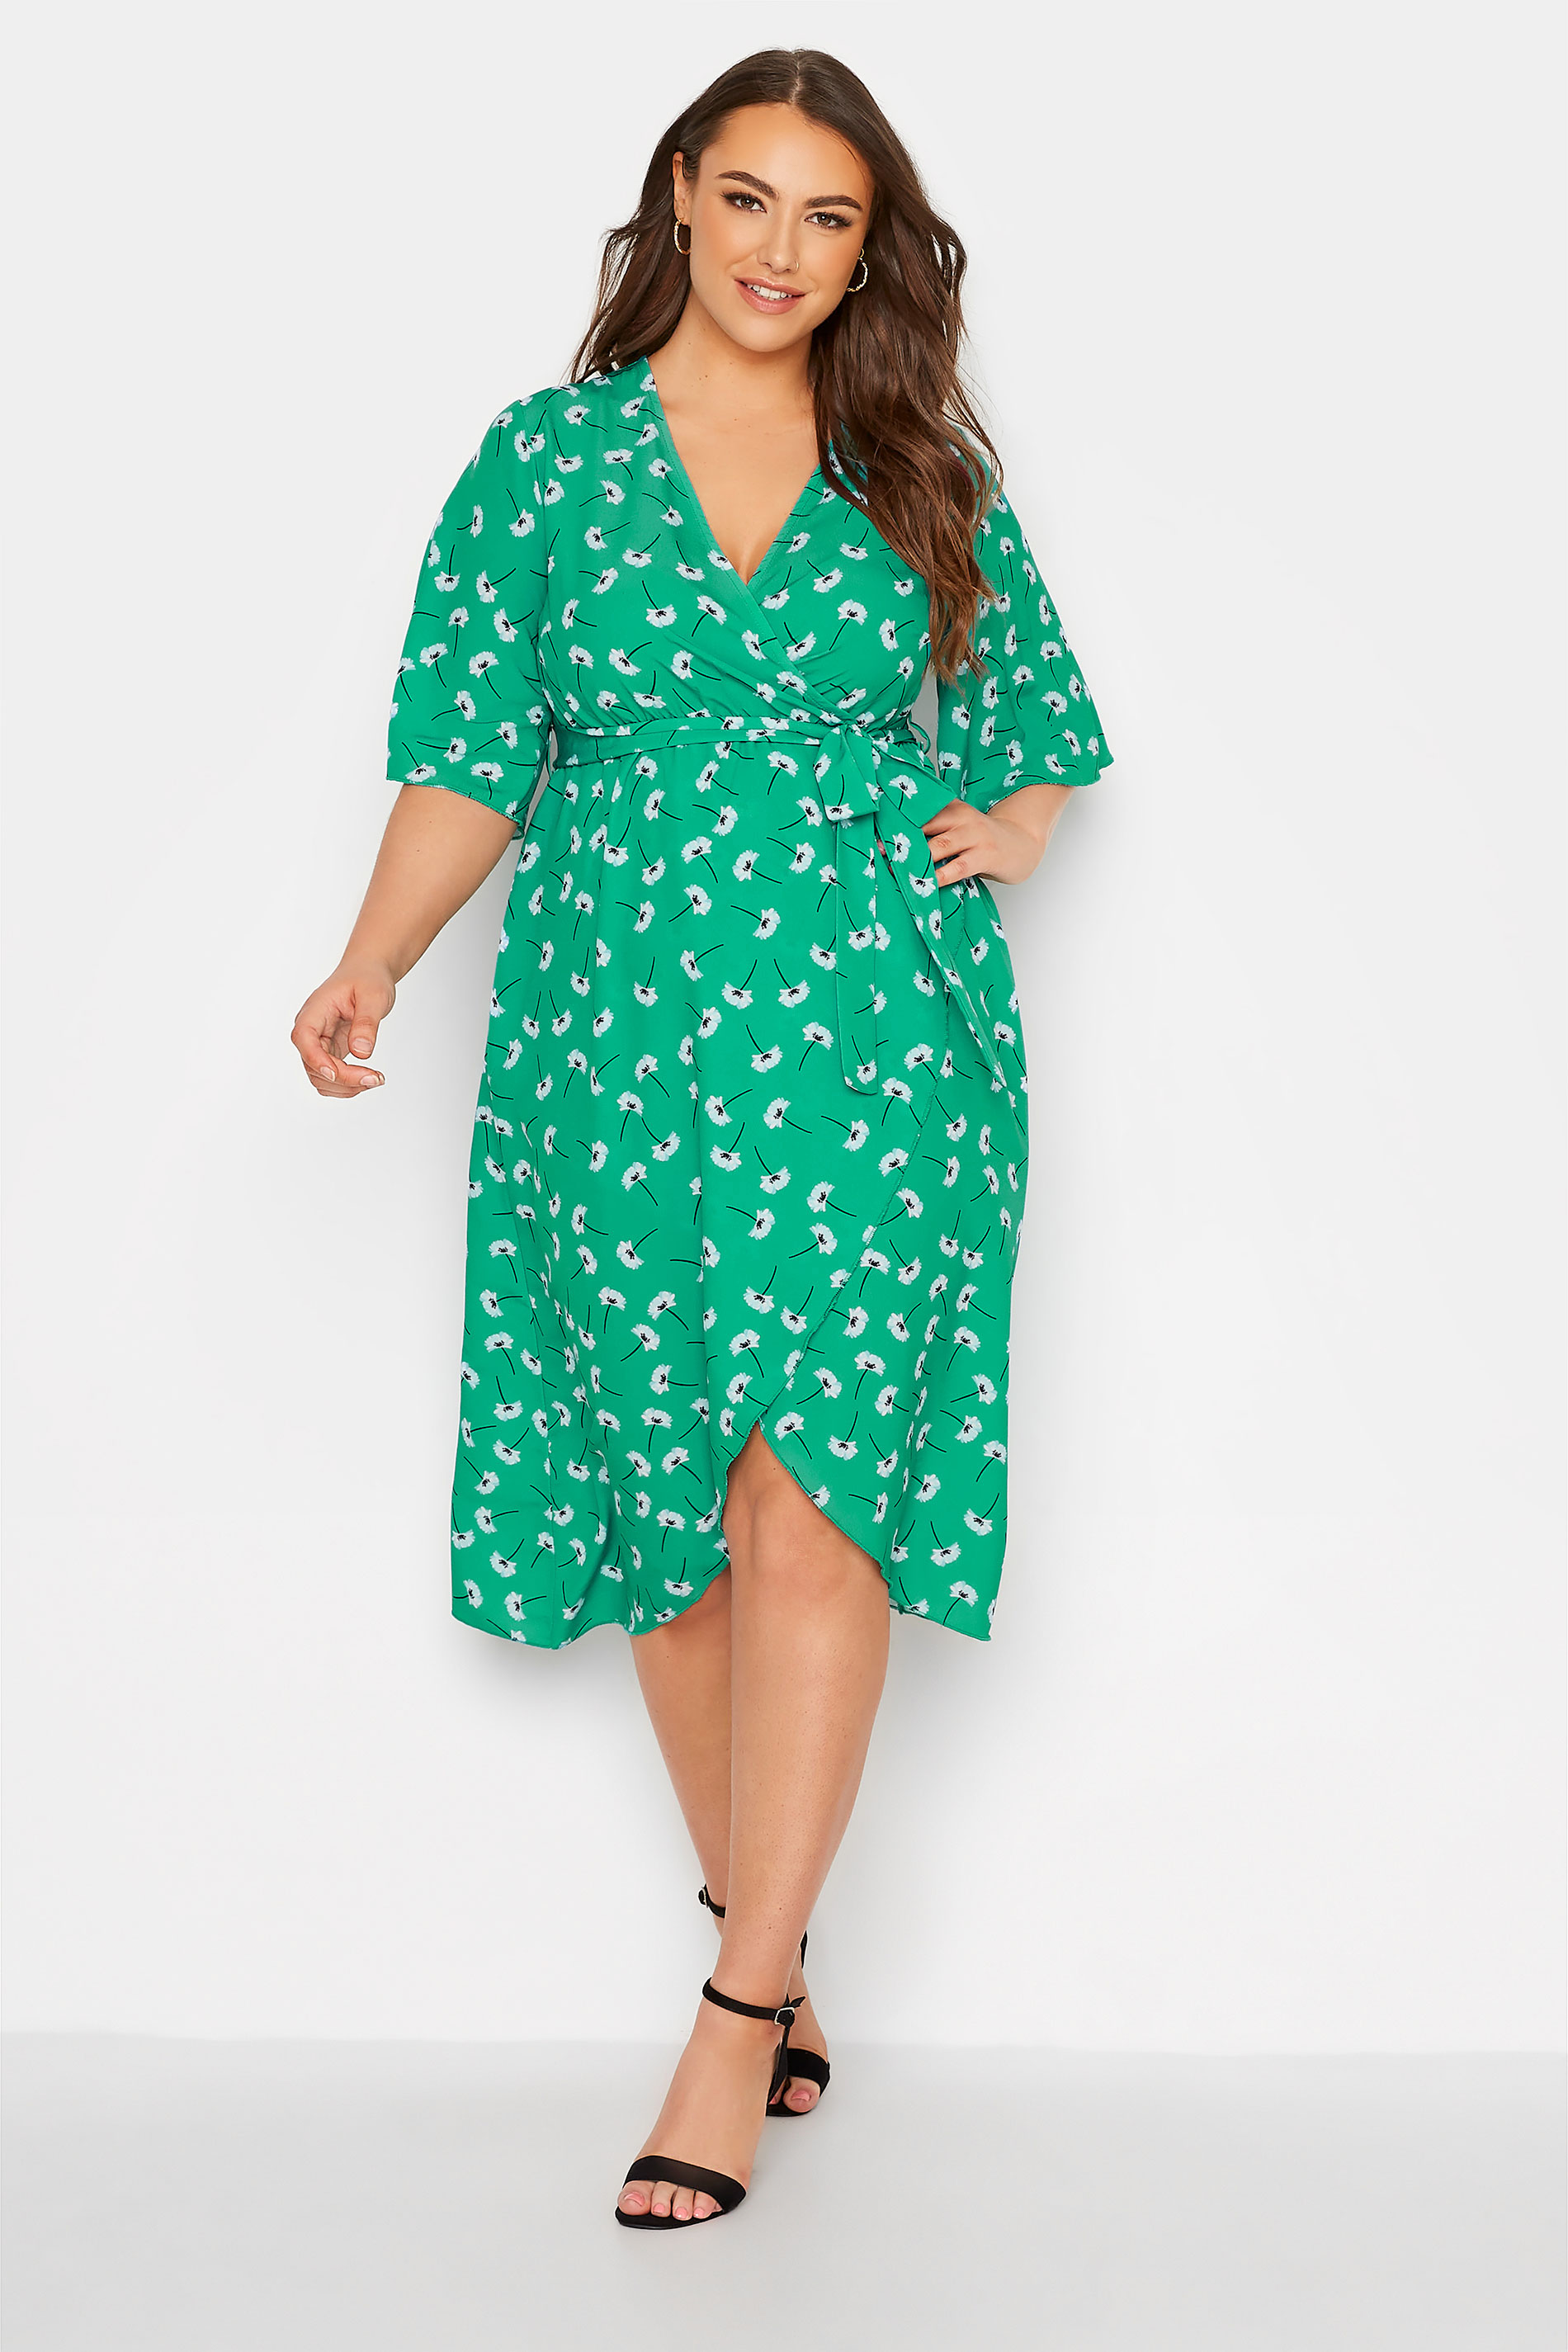 Robes Grande Taille Grande taille  Robes Portefeuilles | YOURS LONDON - Robe Verte Floral Style Portefeuille - NU44321